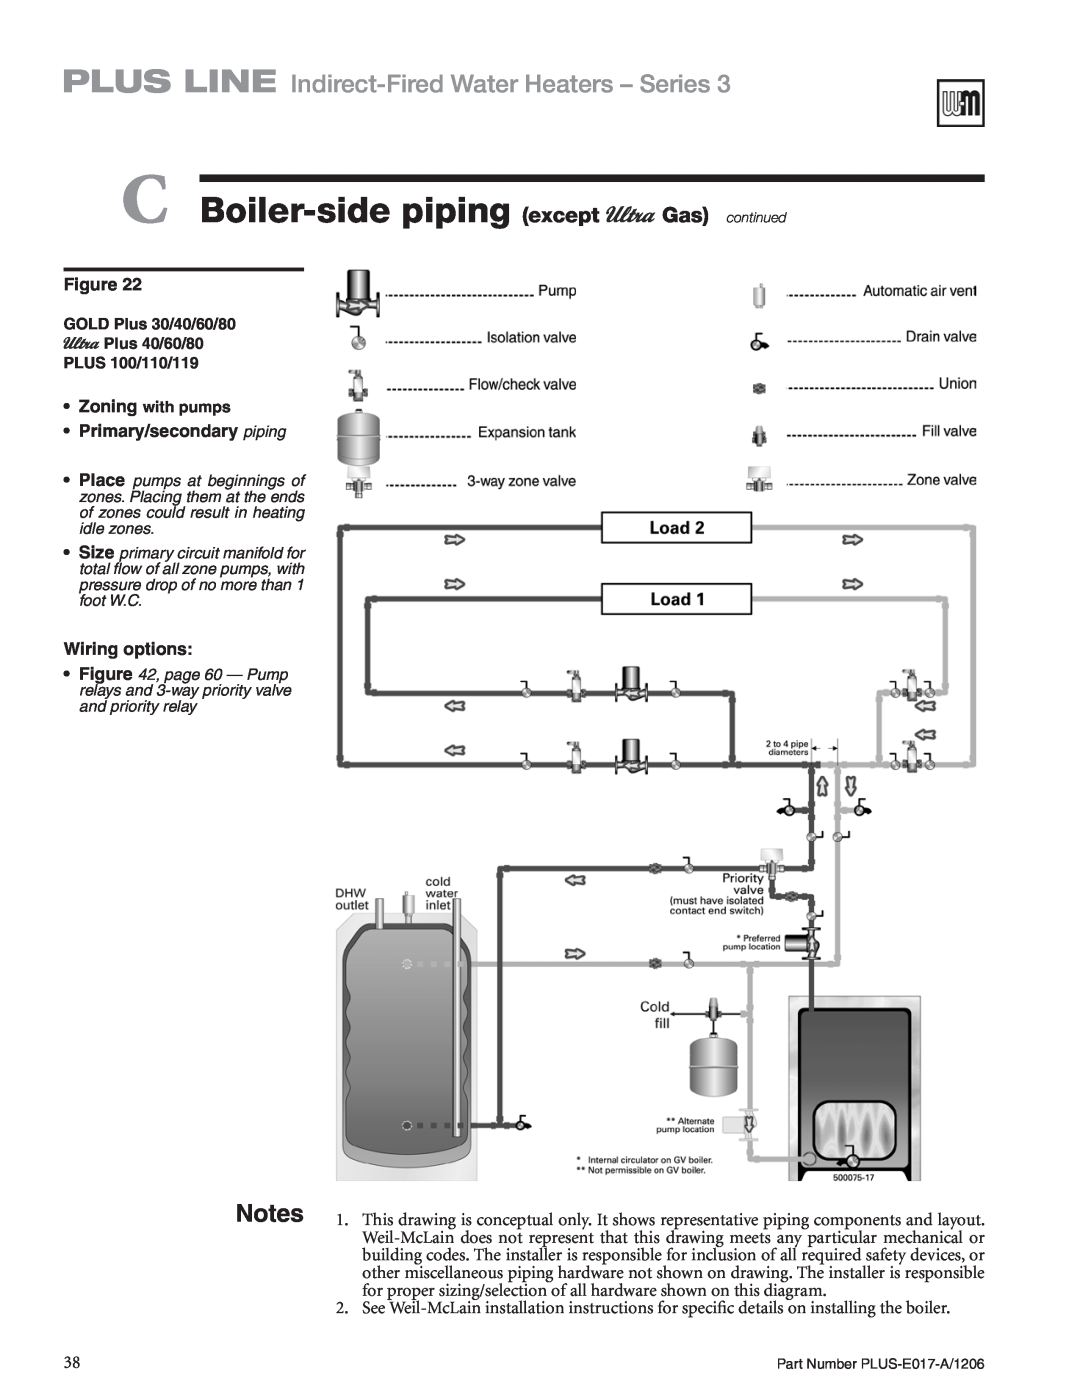 Weil-McLain PLUS-E017-A/1206 C Boiler-sidepiping except Gas continued, PLUS LINE Indirect-FiredWater Heaters - Series 